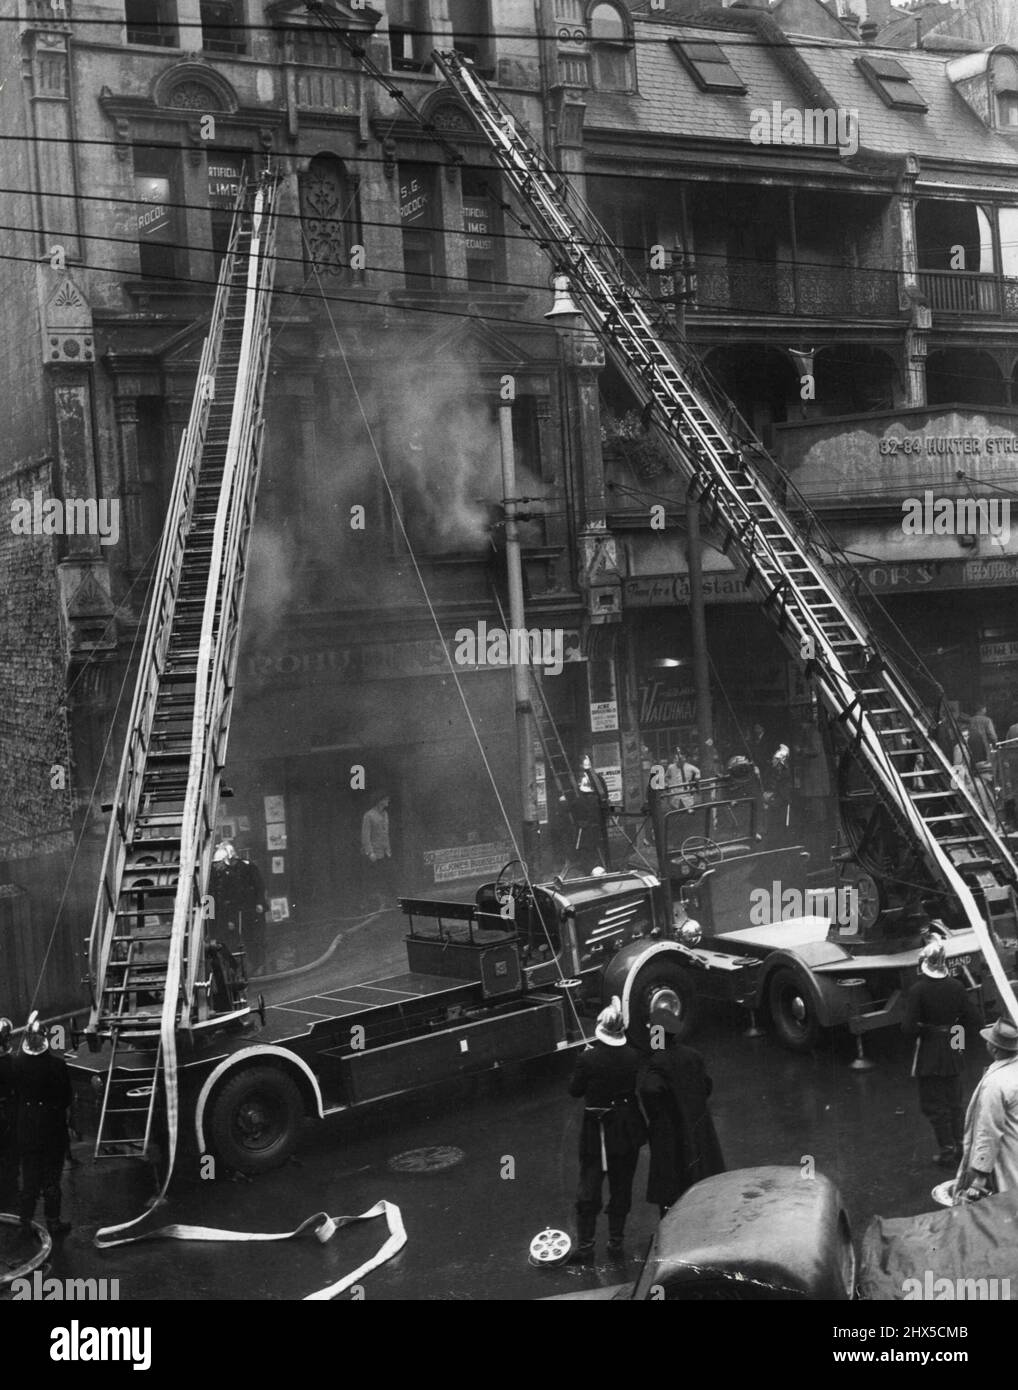 Sabiel building at the Corner of Hunter and Elizabeth ***** where a fire broke out ***** morning. Smoke ***** seen coming from the building as firemen ***** at the extension ladders. June 8, 1951. (Photo by Kenneth Issitt). Stock Photo